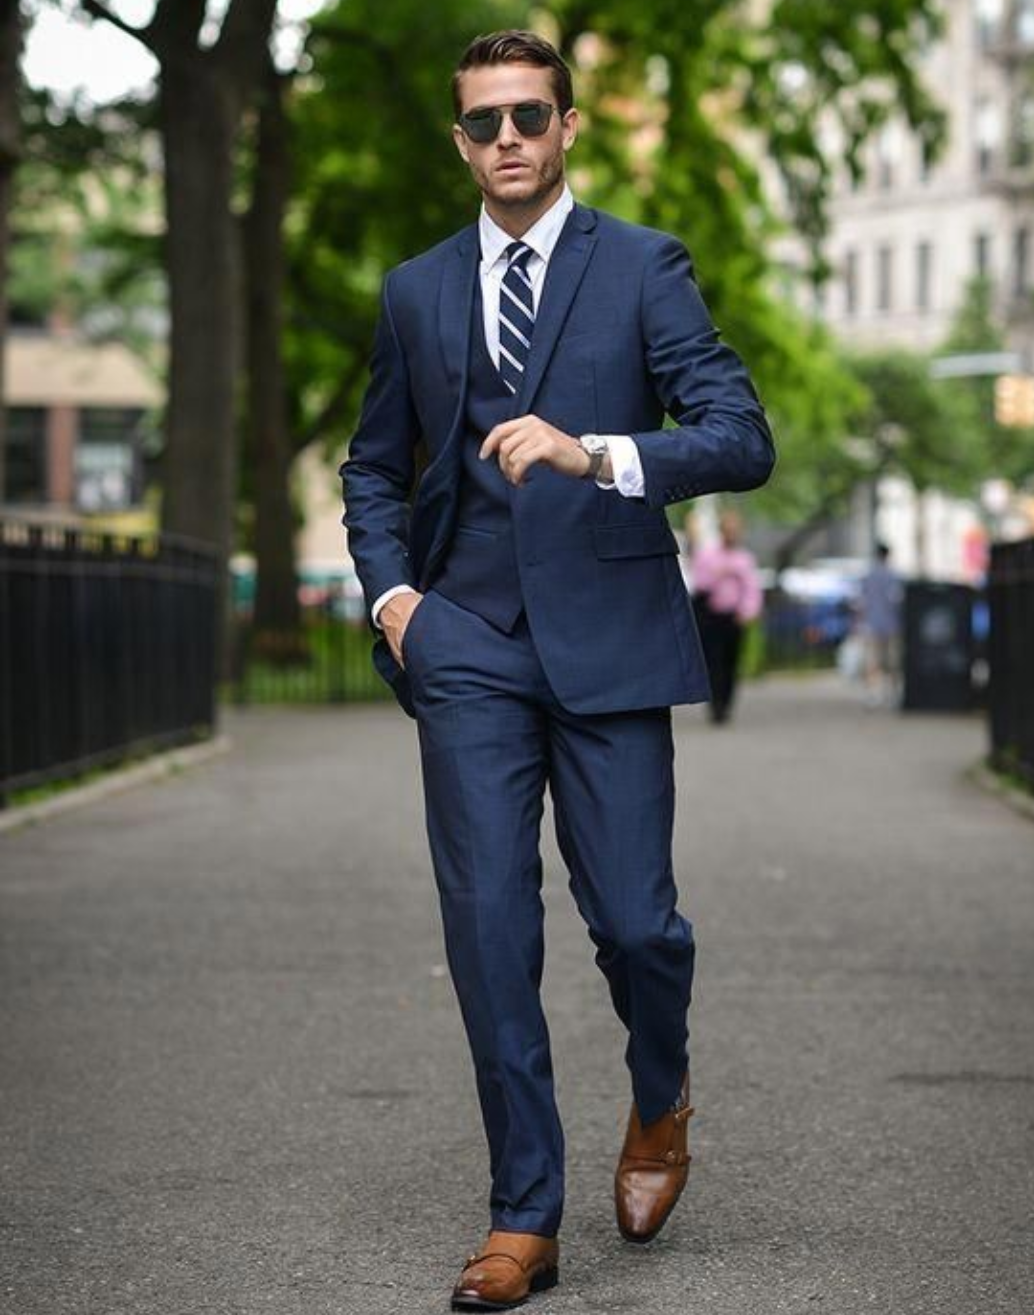 What Color Shirt And Tie To Wear With Navy Blue Suit - Maxium Buff